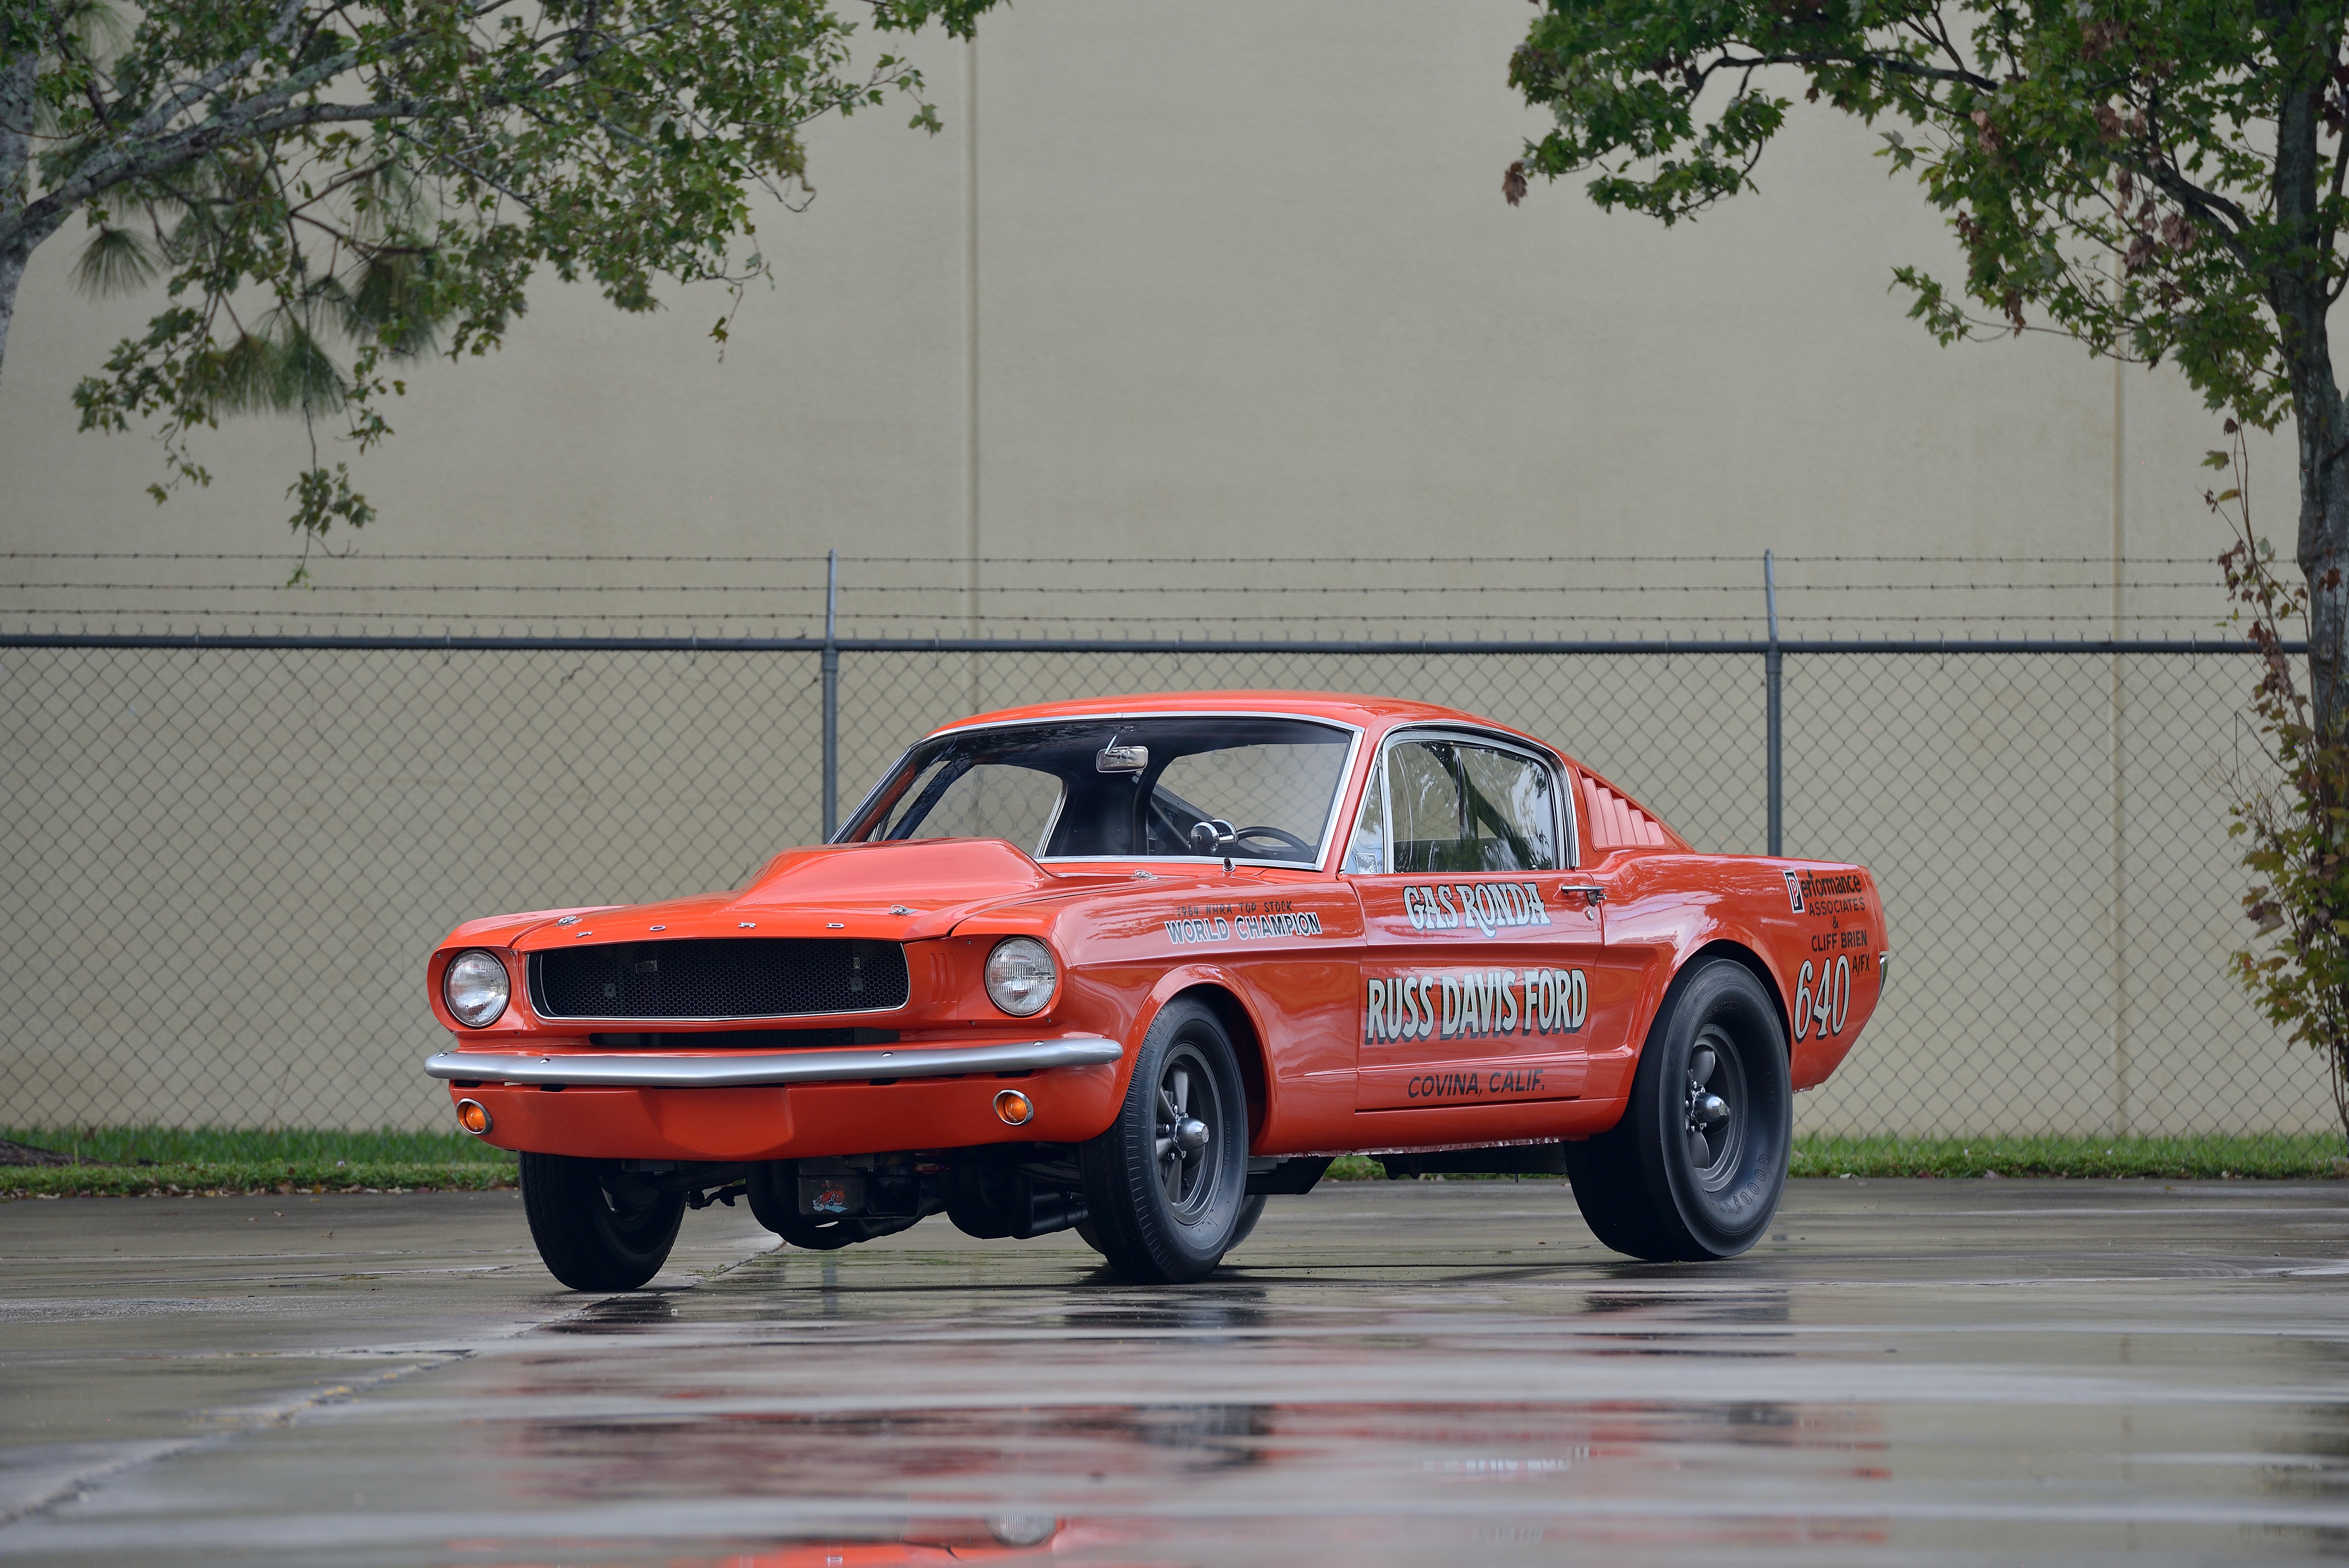 , Lightweights could pull ‘heavy’ prices at Mecum&#8217;s Kissimmee auction, ClassicCars.com Journal